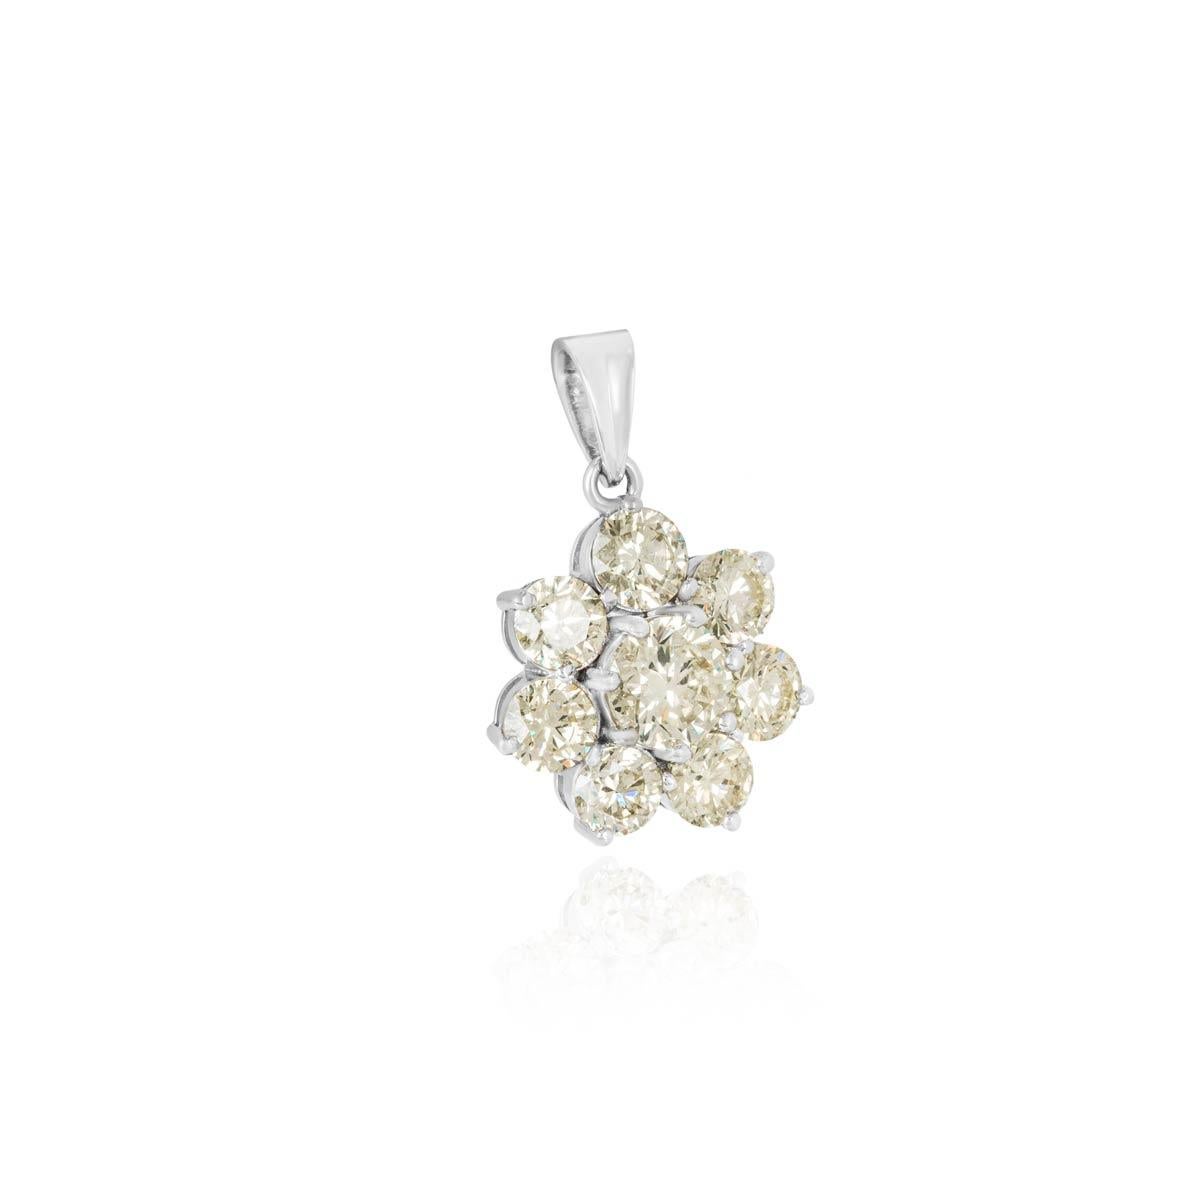 A large and beautiful 18k white gold diamond pendant. The flower style pendant is set with 7 round brilliant cut diamonds, the centre diamond weighs 1.96ct and the remaining diamonds have a total weight of 5.07ct. The diamonds are predominantly M